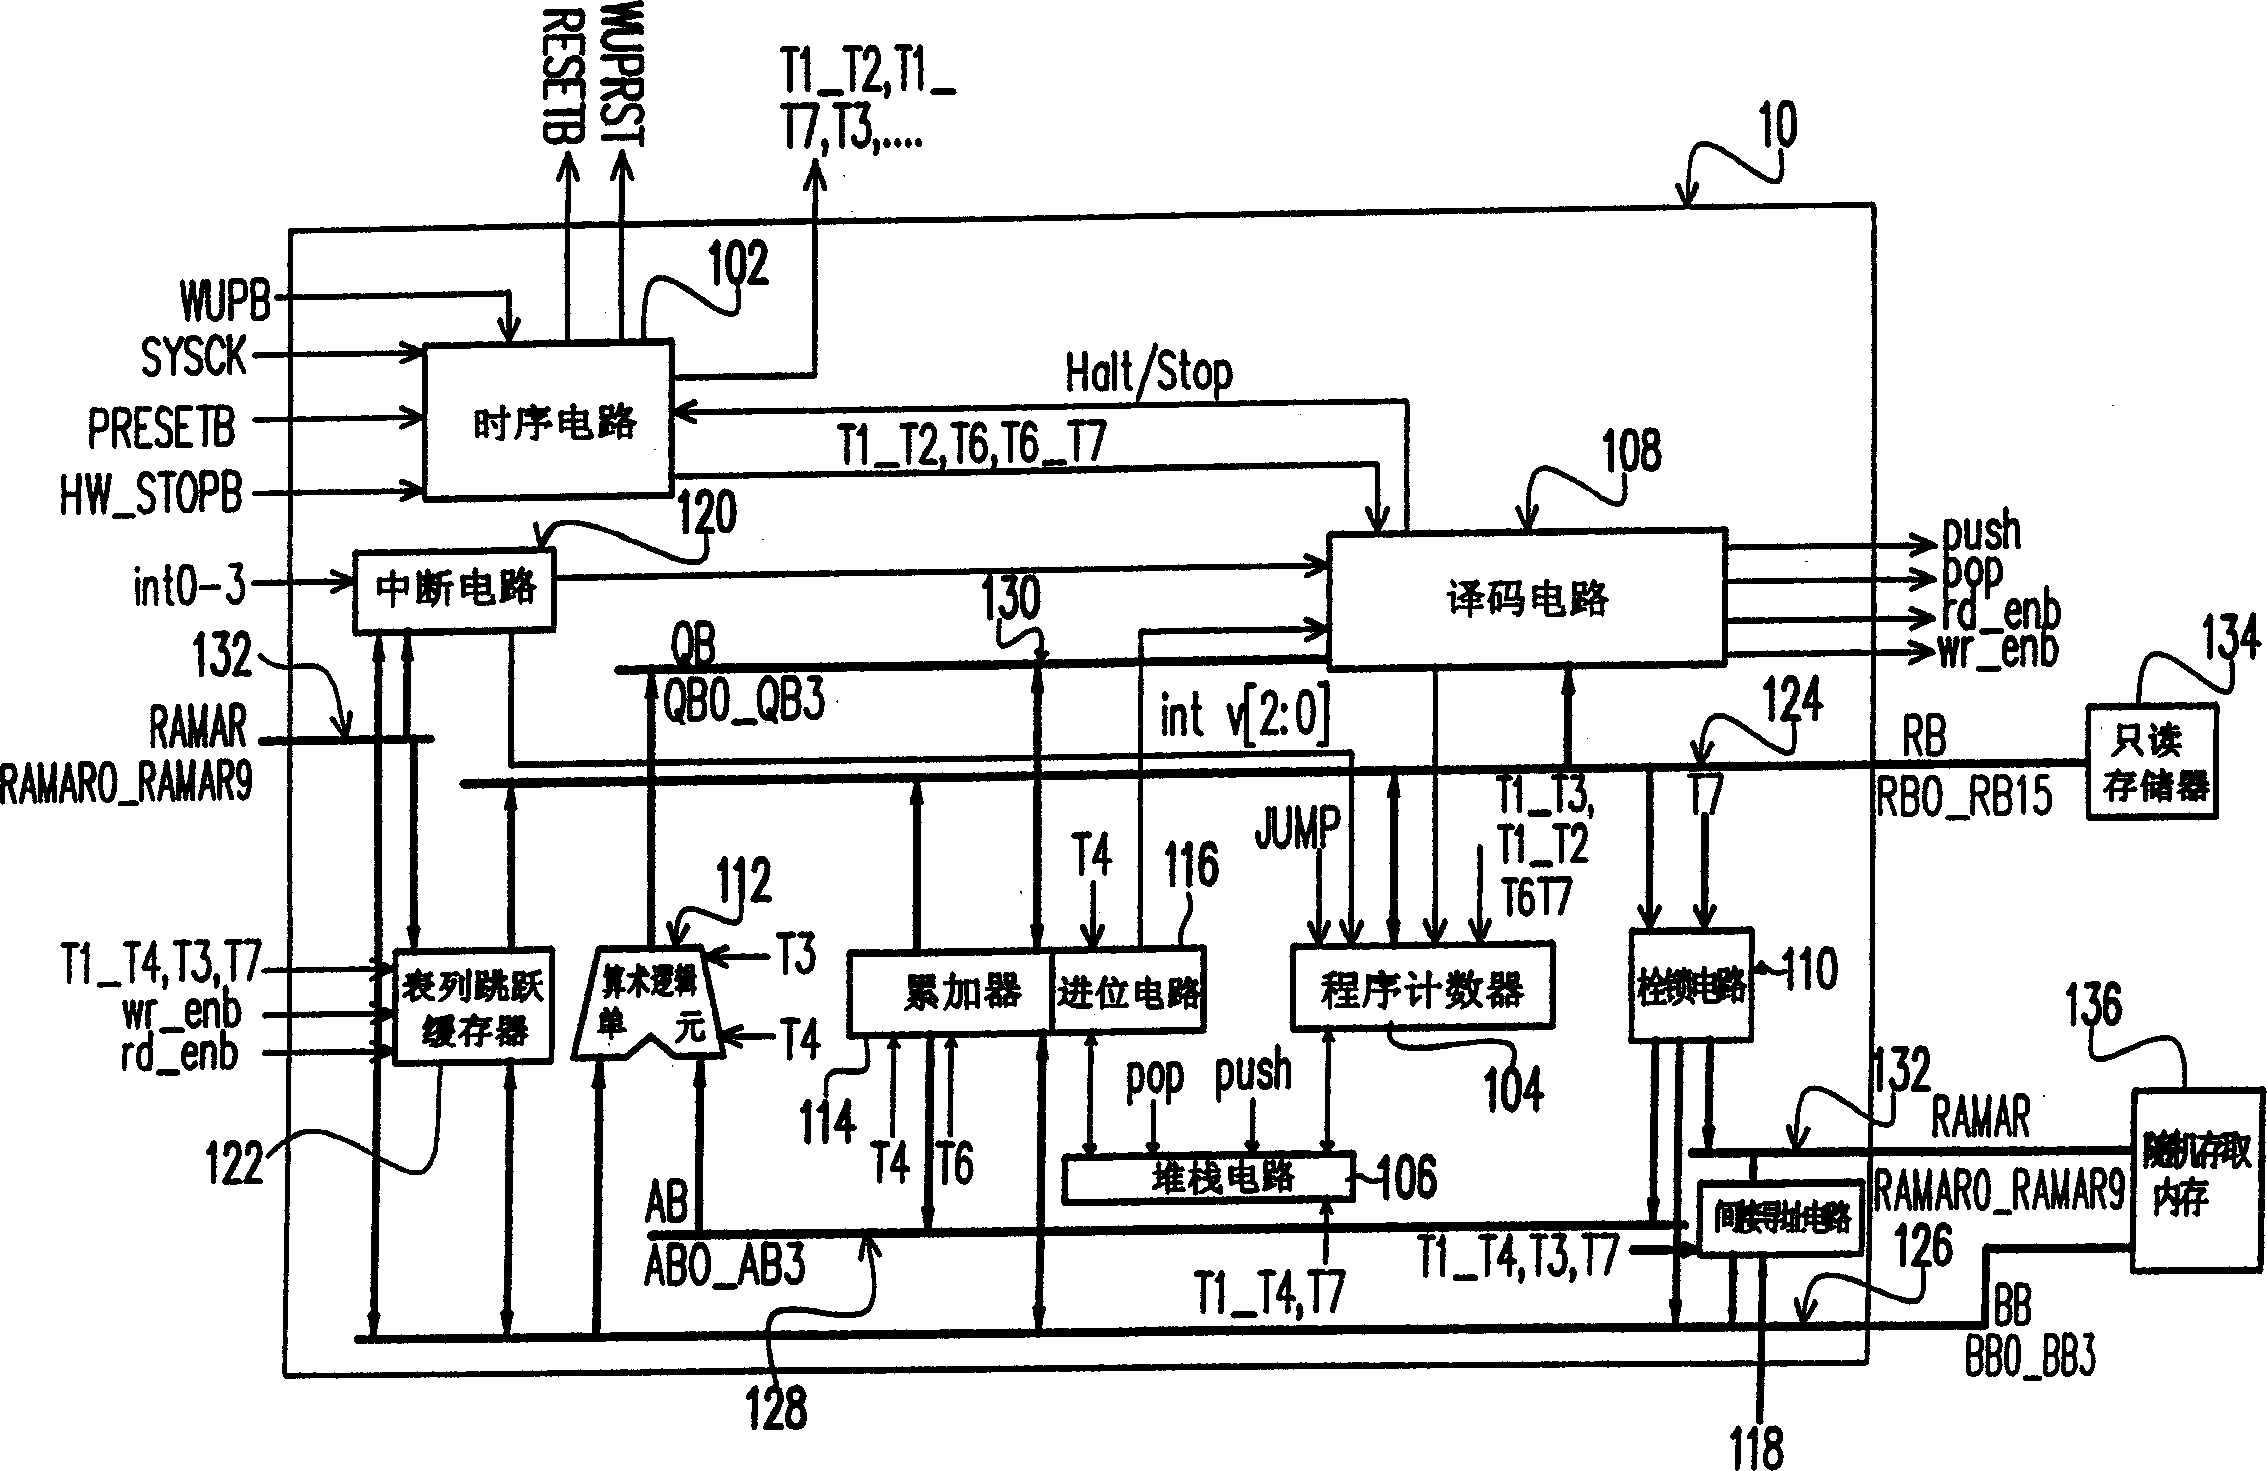 Function and instruction number reduced microprocessor